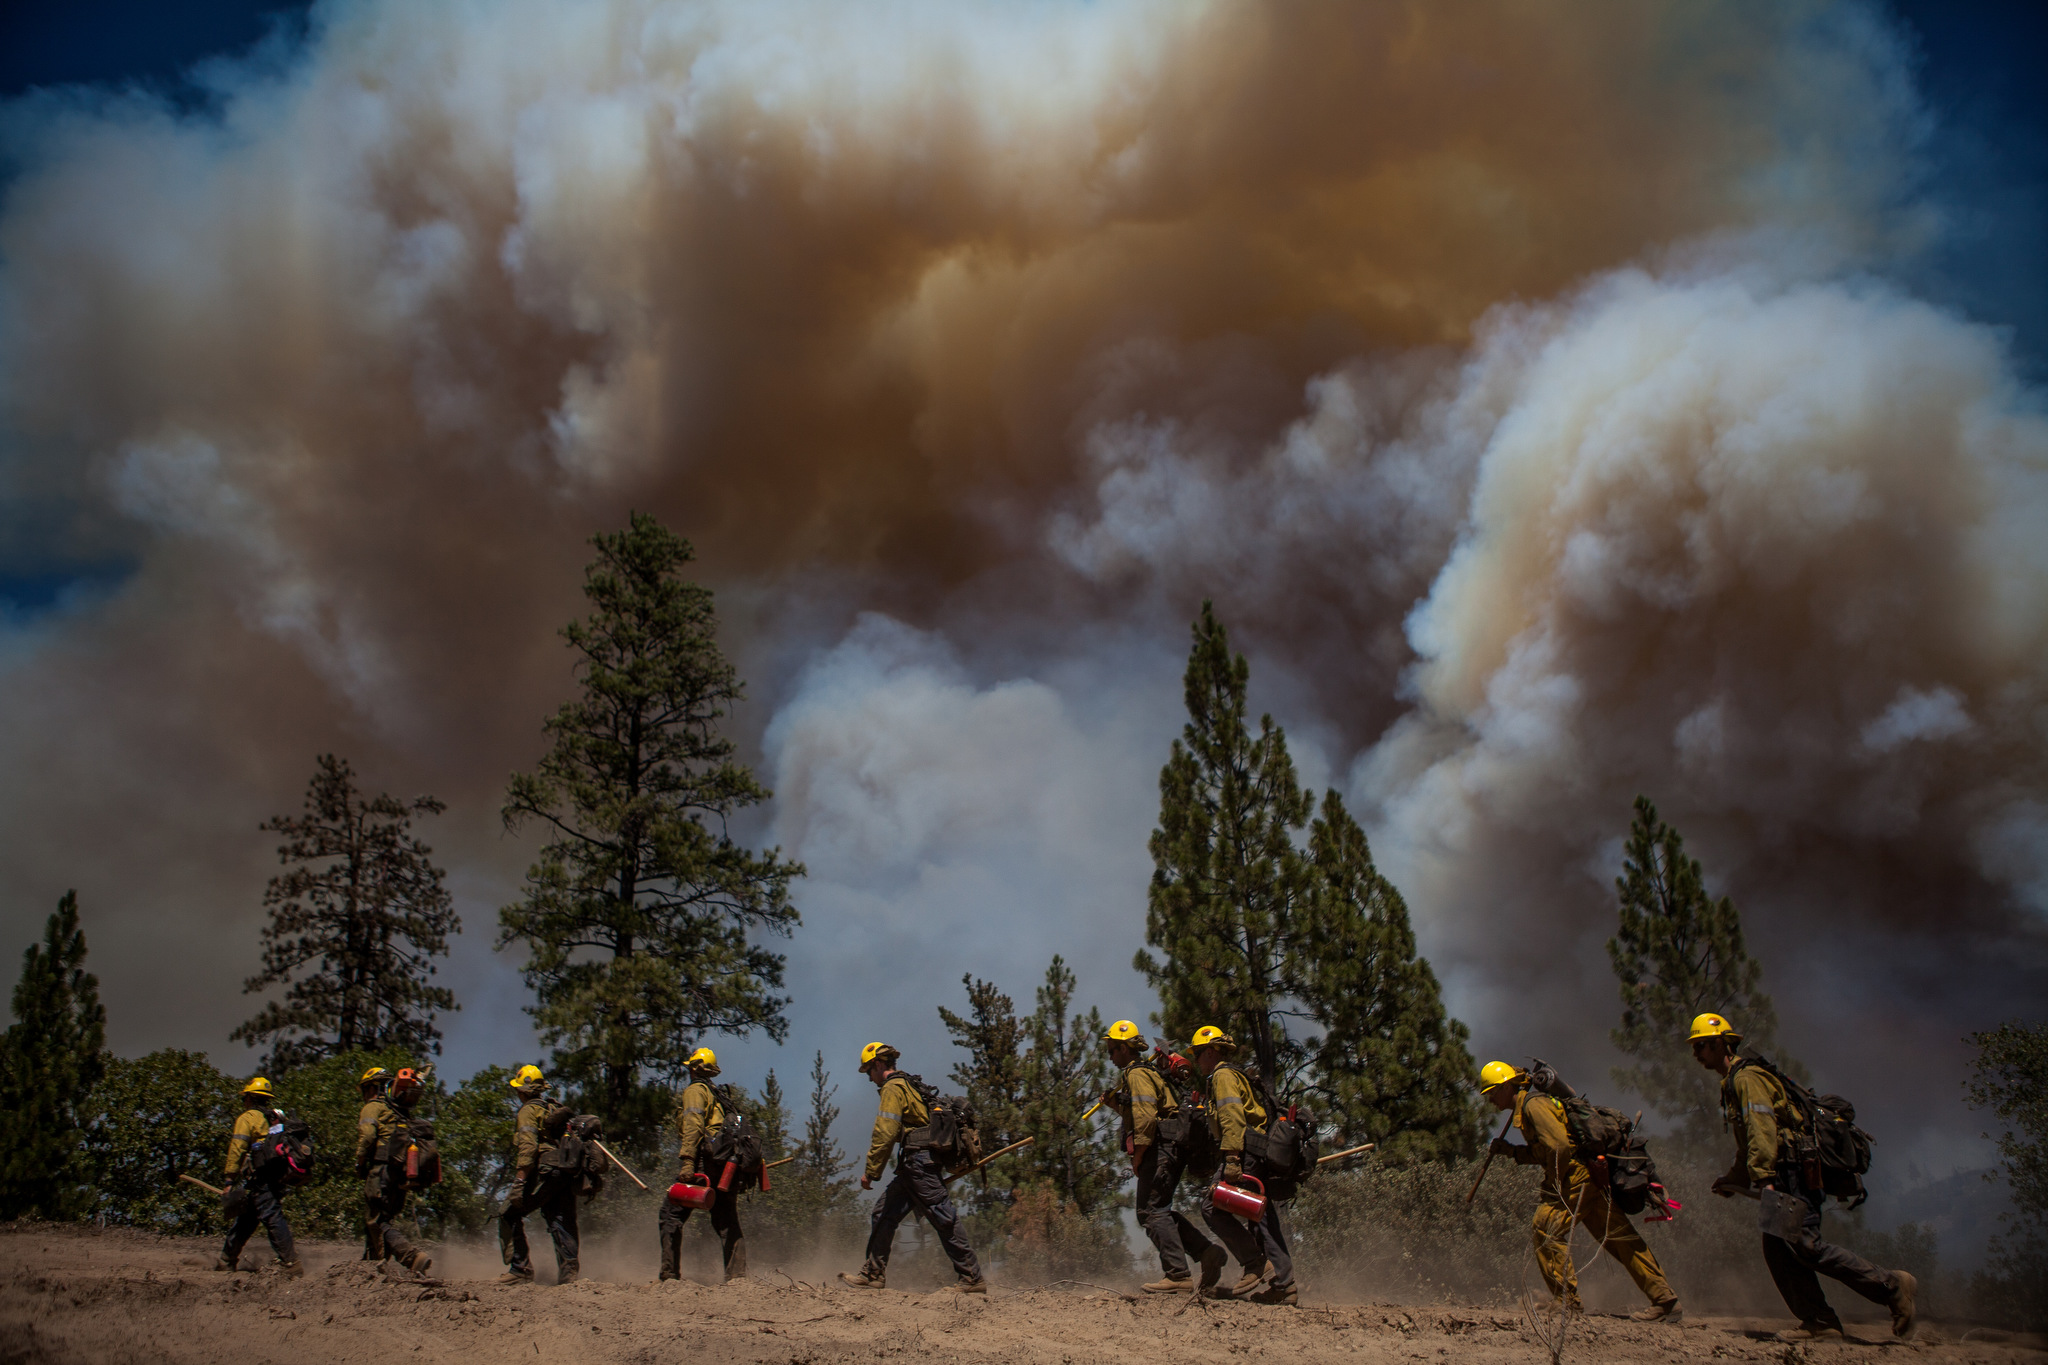  Los Angeles County firefighters hike in on a fire line on the Rim Fire near Groveland, California, August 22, 2013. The Rim Fire burned 257,314 acres and is the third largest wildfire in California history. 